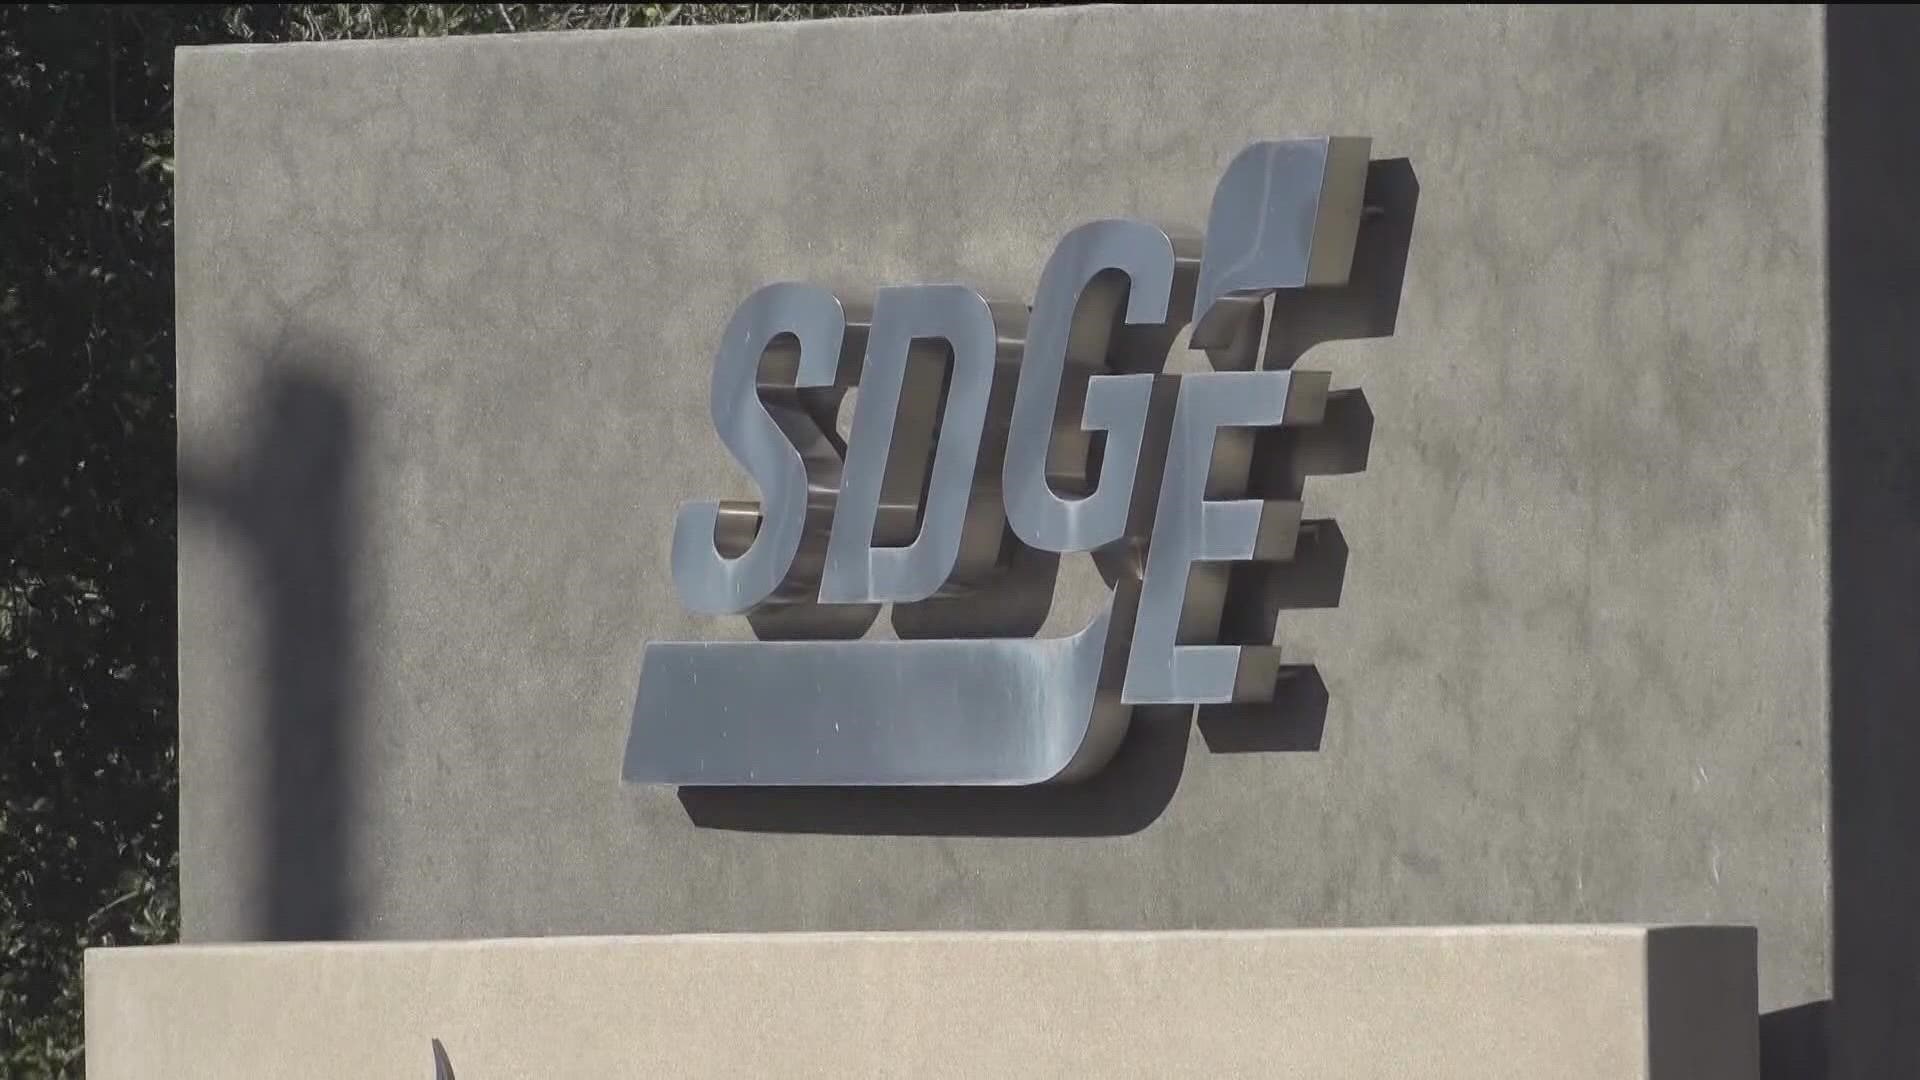 If rolling blackouts begin, SDG&E has a list showing which circuits would lose power first.